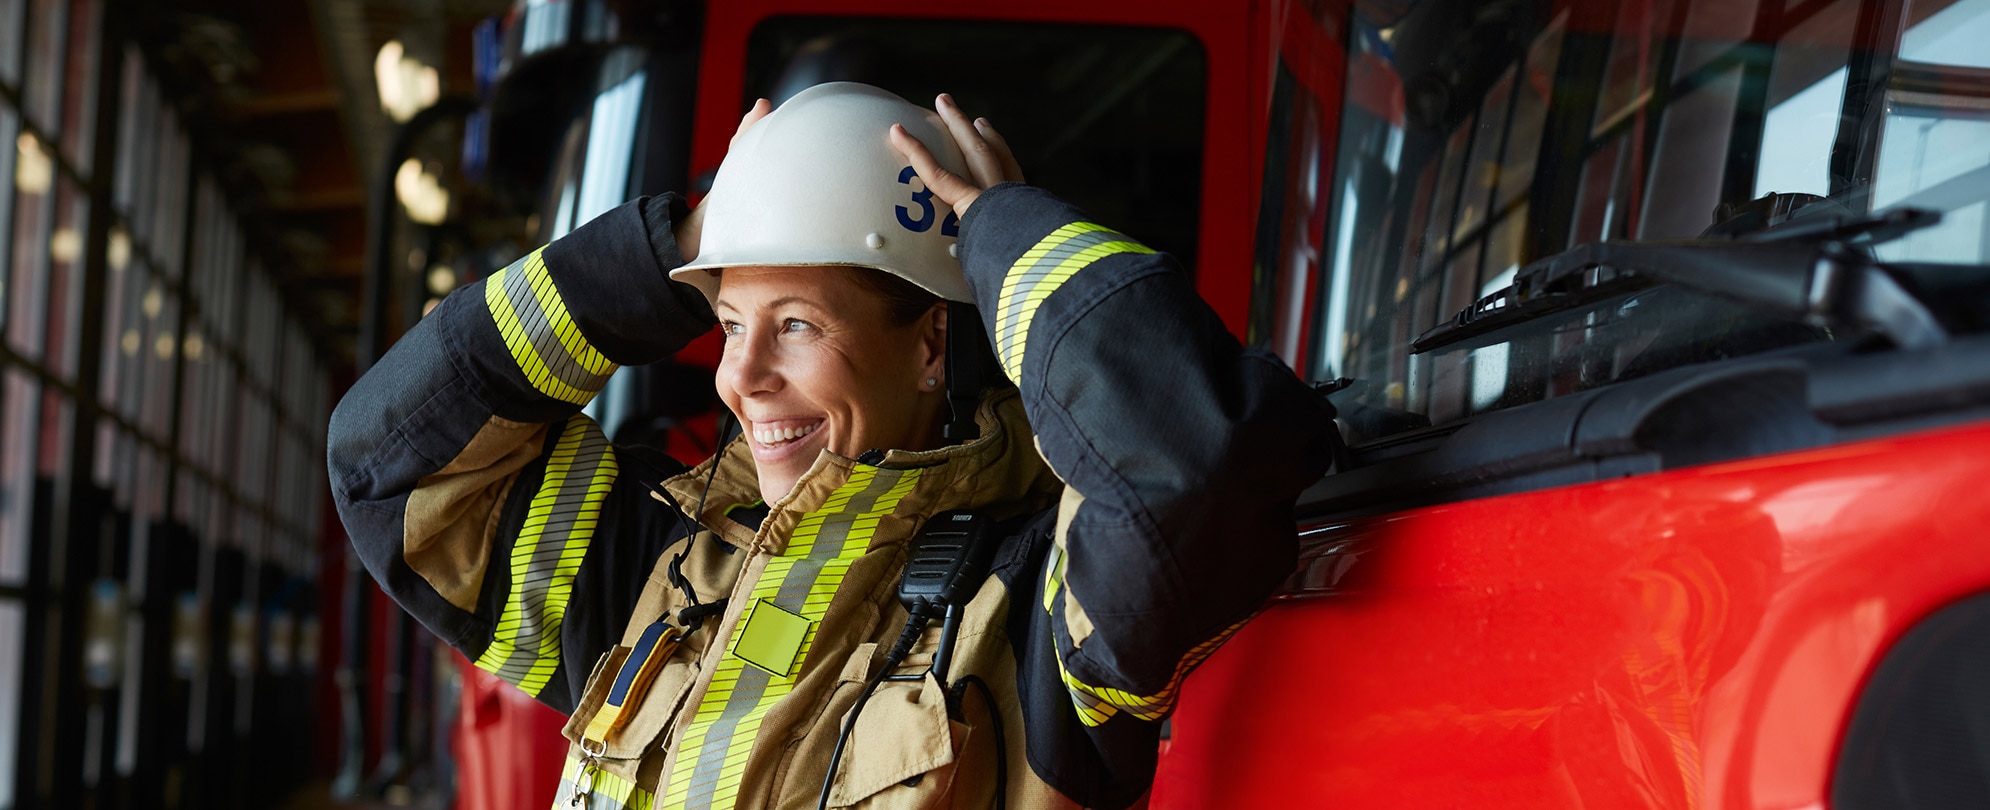 A female firefighter smiling while holding her helmet.